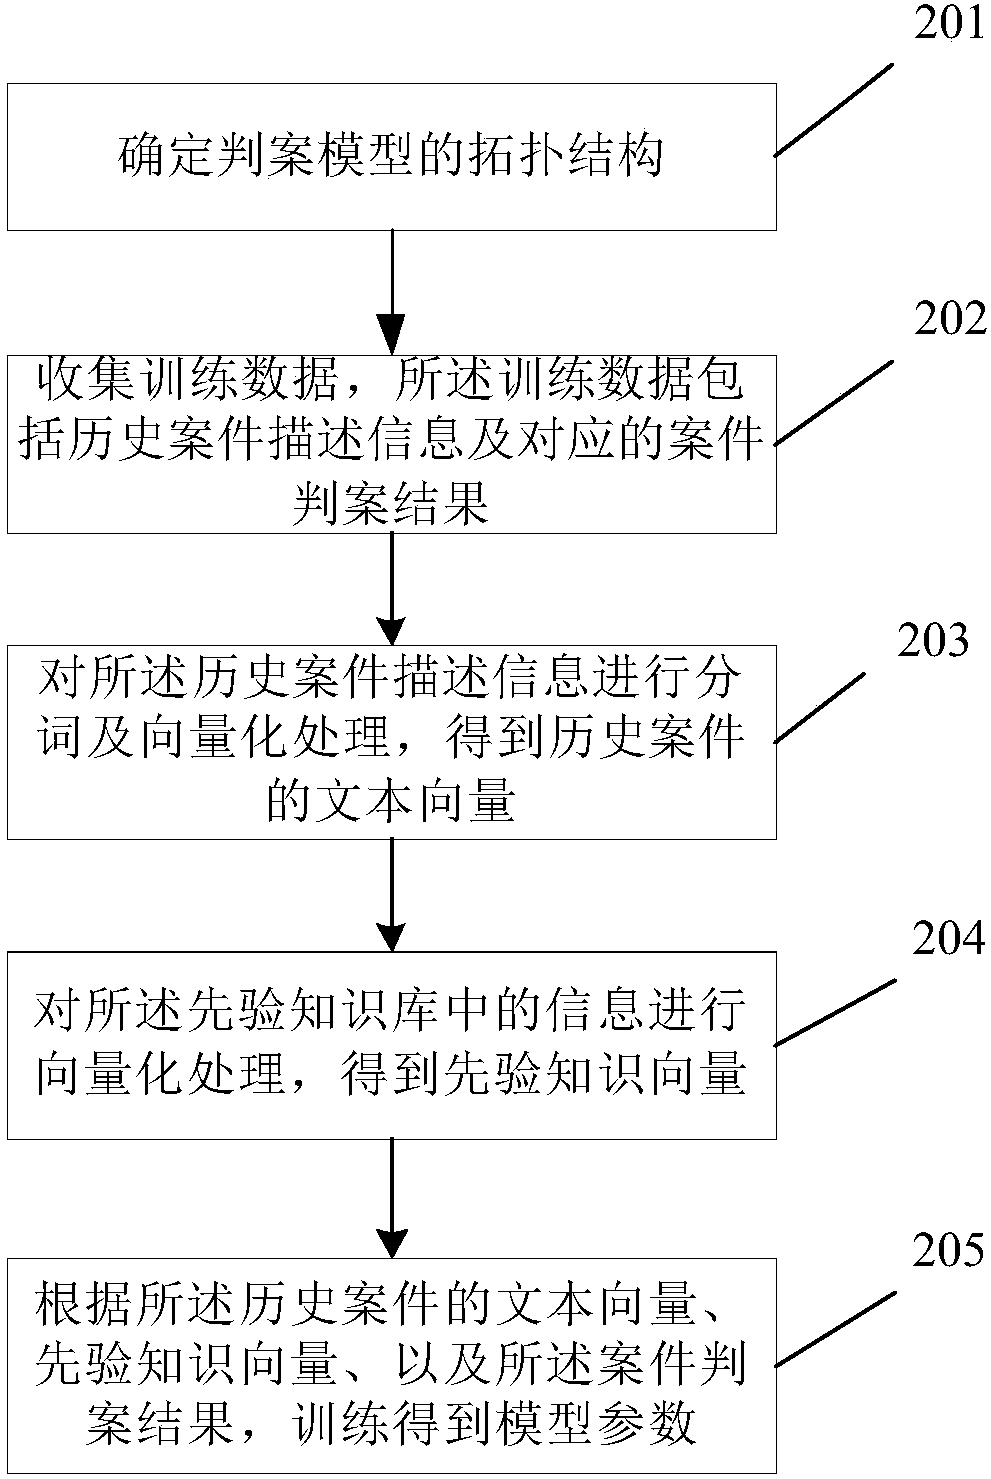 Automatic case decision method and system